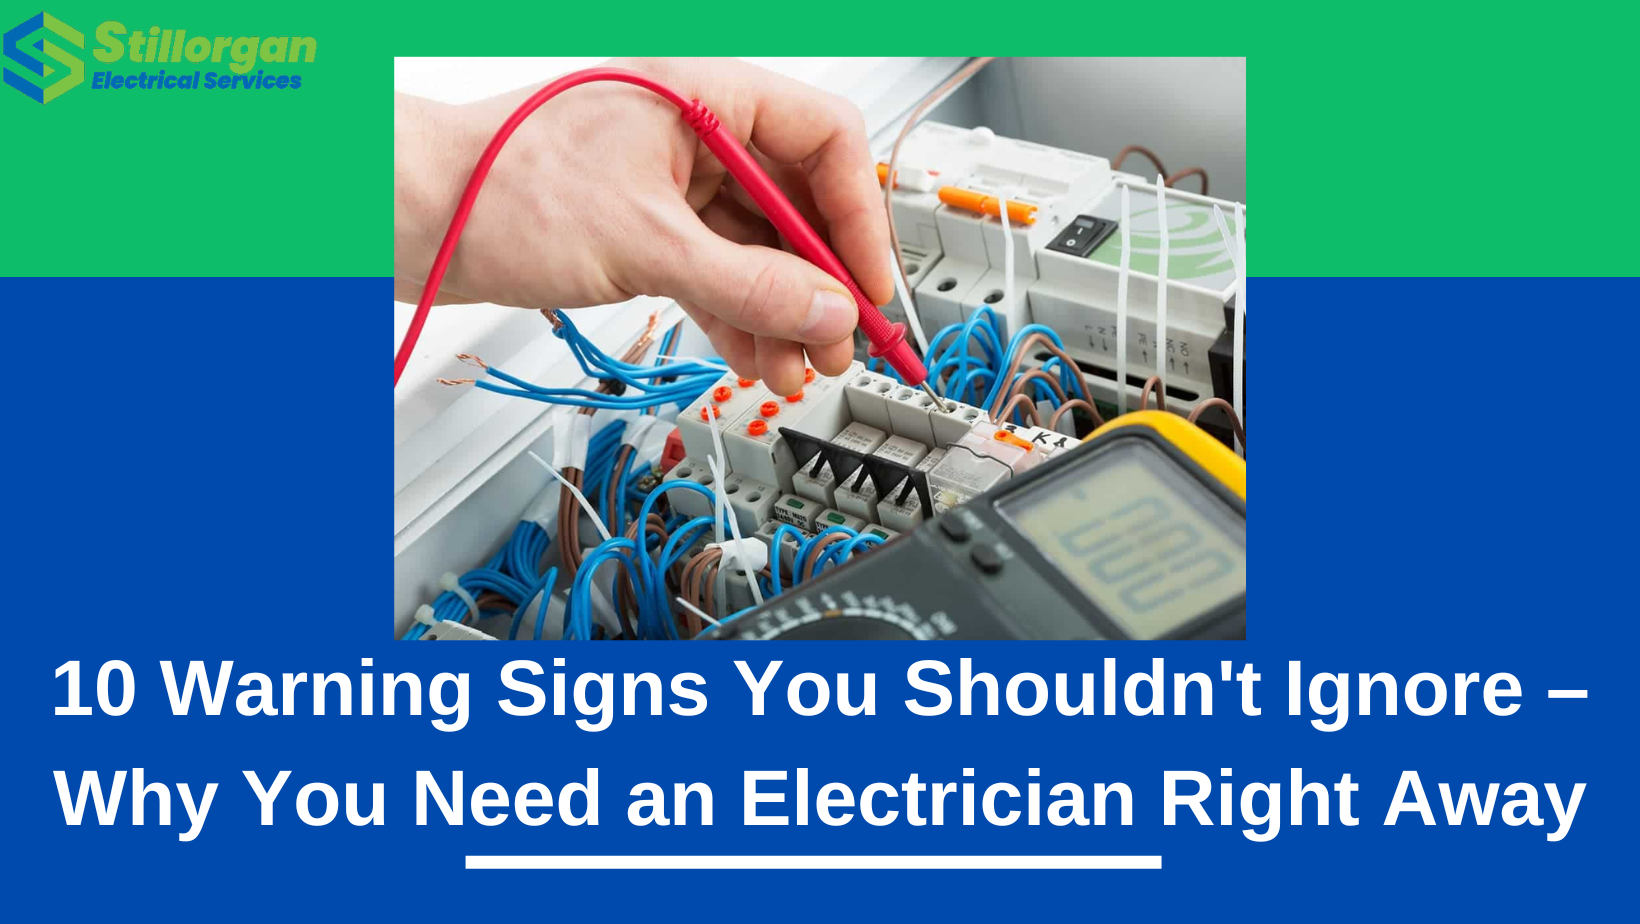 10 Warning Signs You Shouldn't Ignore – Why You Need an Electrician Right Away